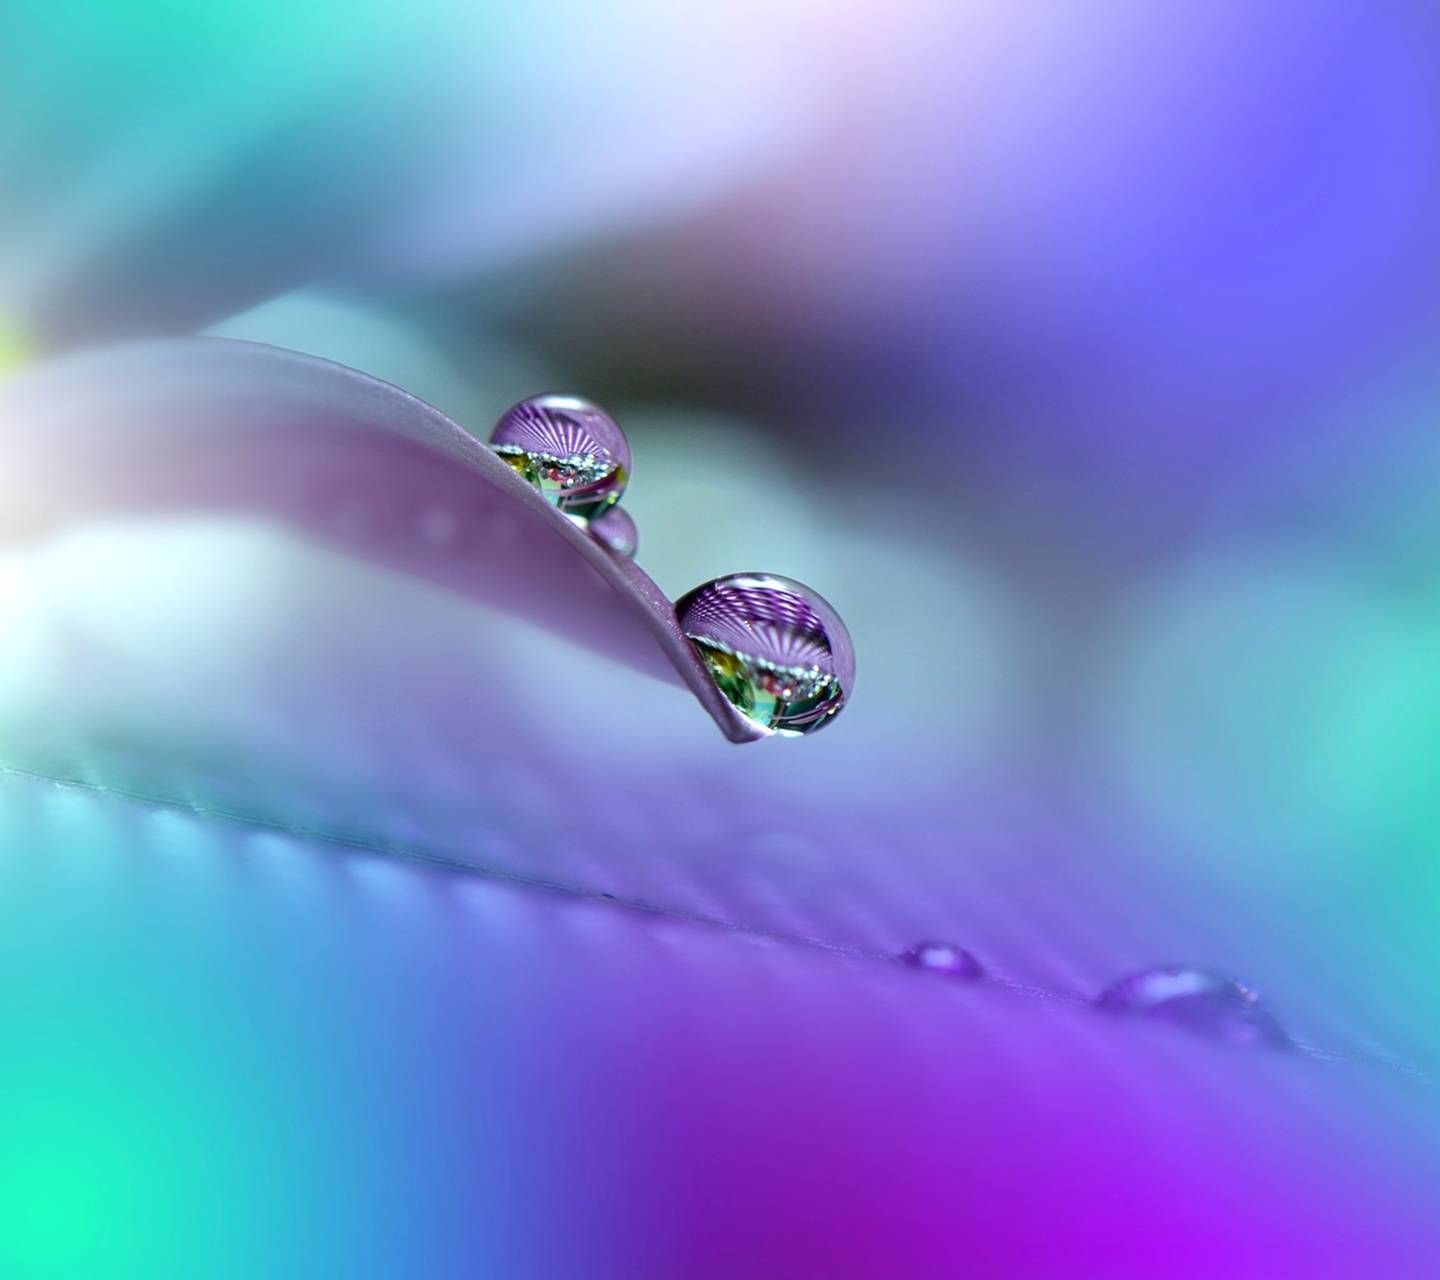 Colorful Raindrop Wallpapers